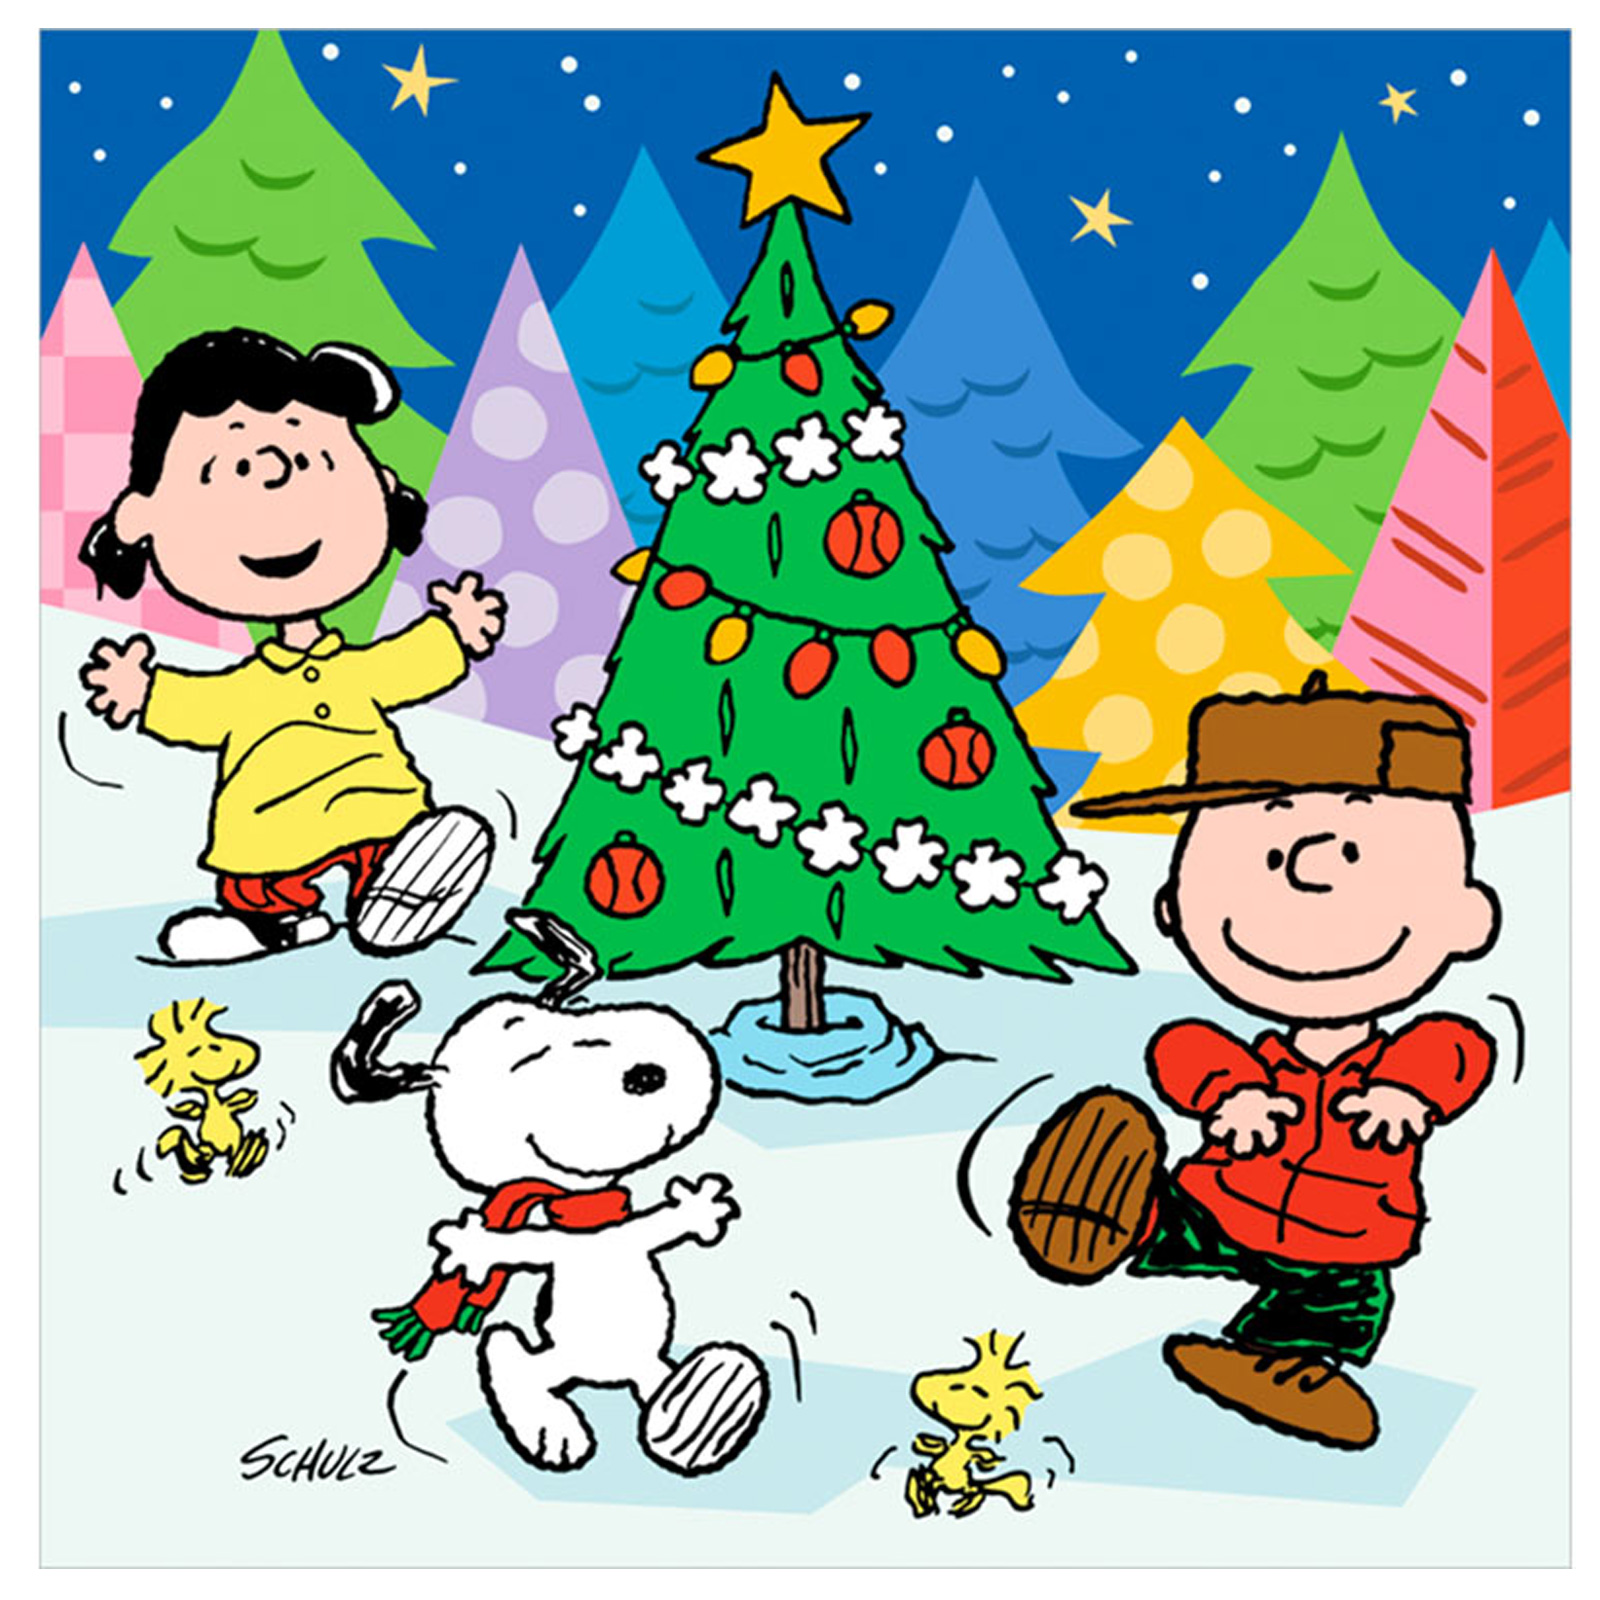 Charlie Brown Peanuts Ics Snoopy Christmas F Wallpaper Background